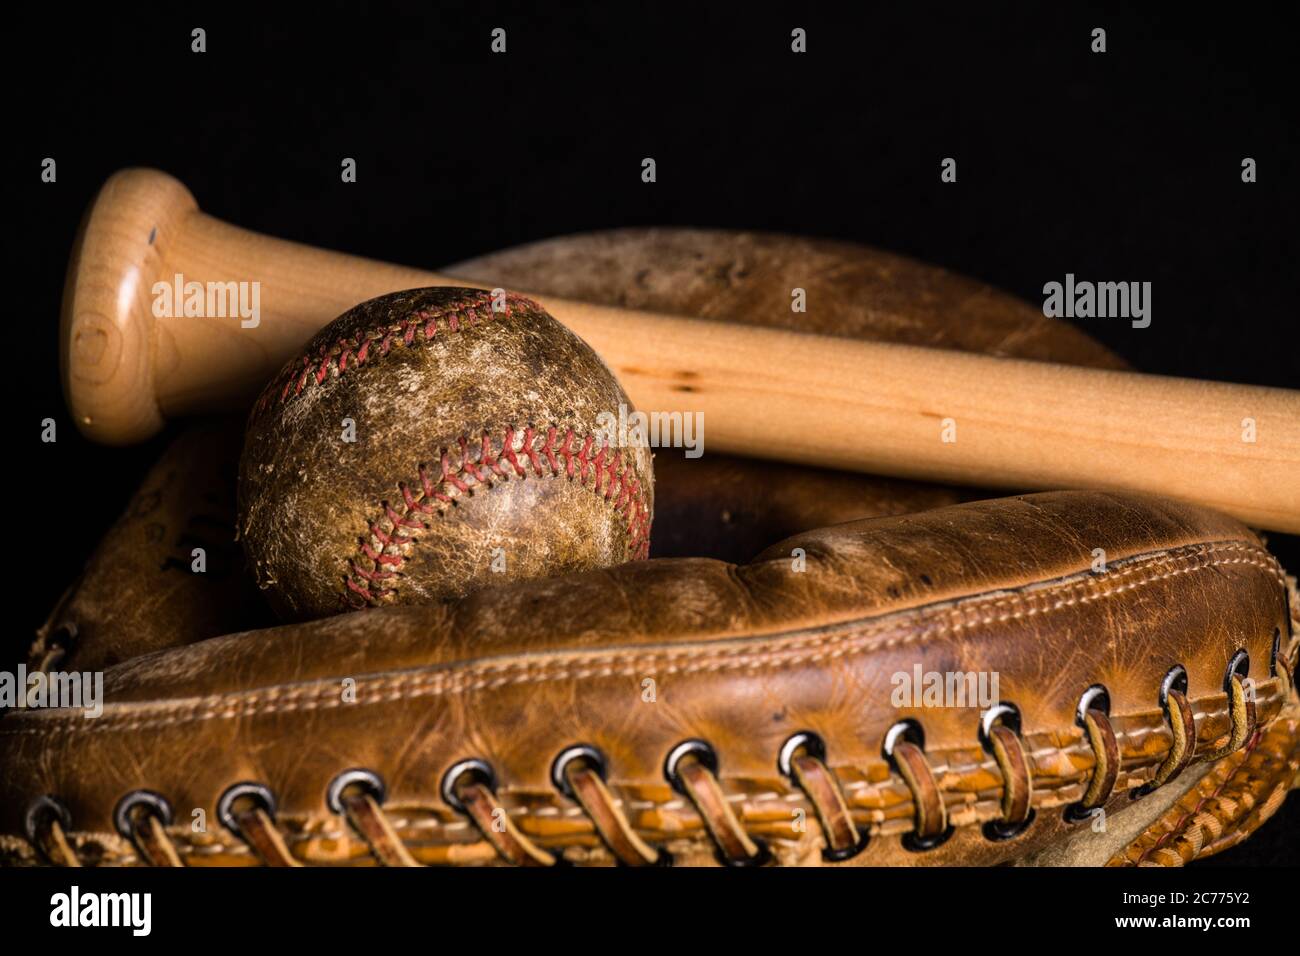 Old baseball, stained and wonrn out, and old style catchers mitt joined by a brand new baseball bat. Stock Photo